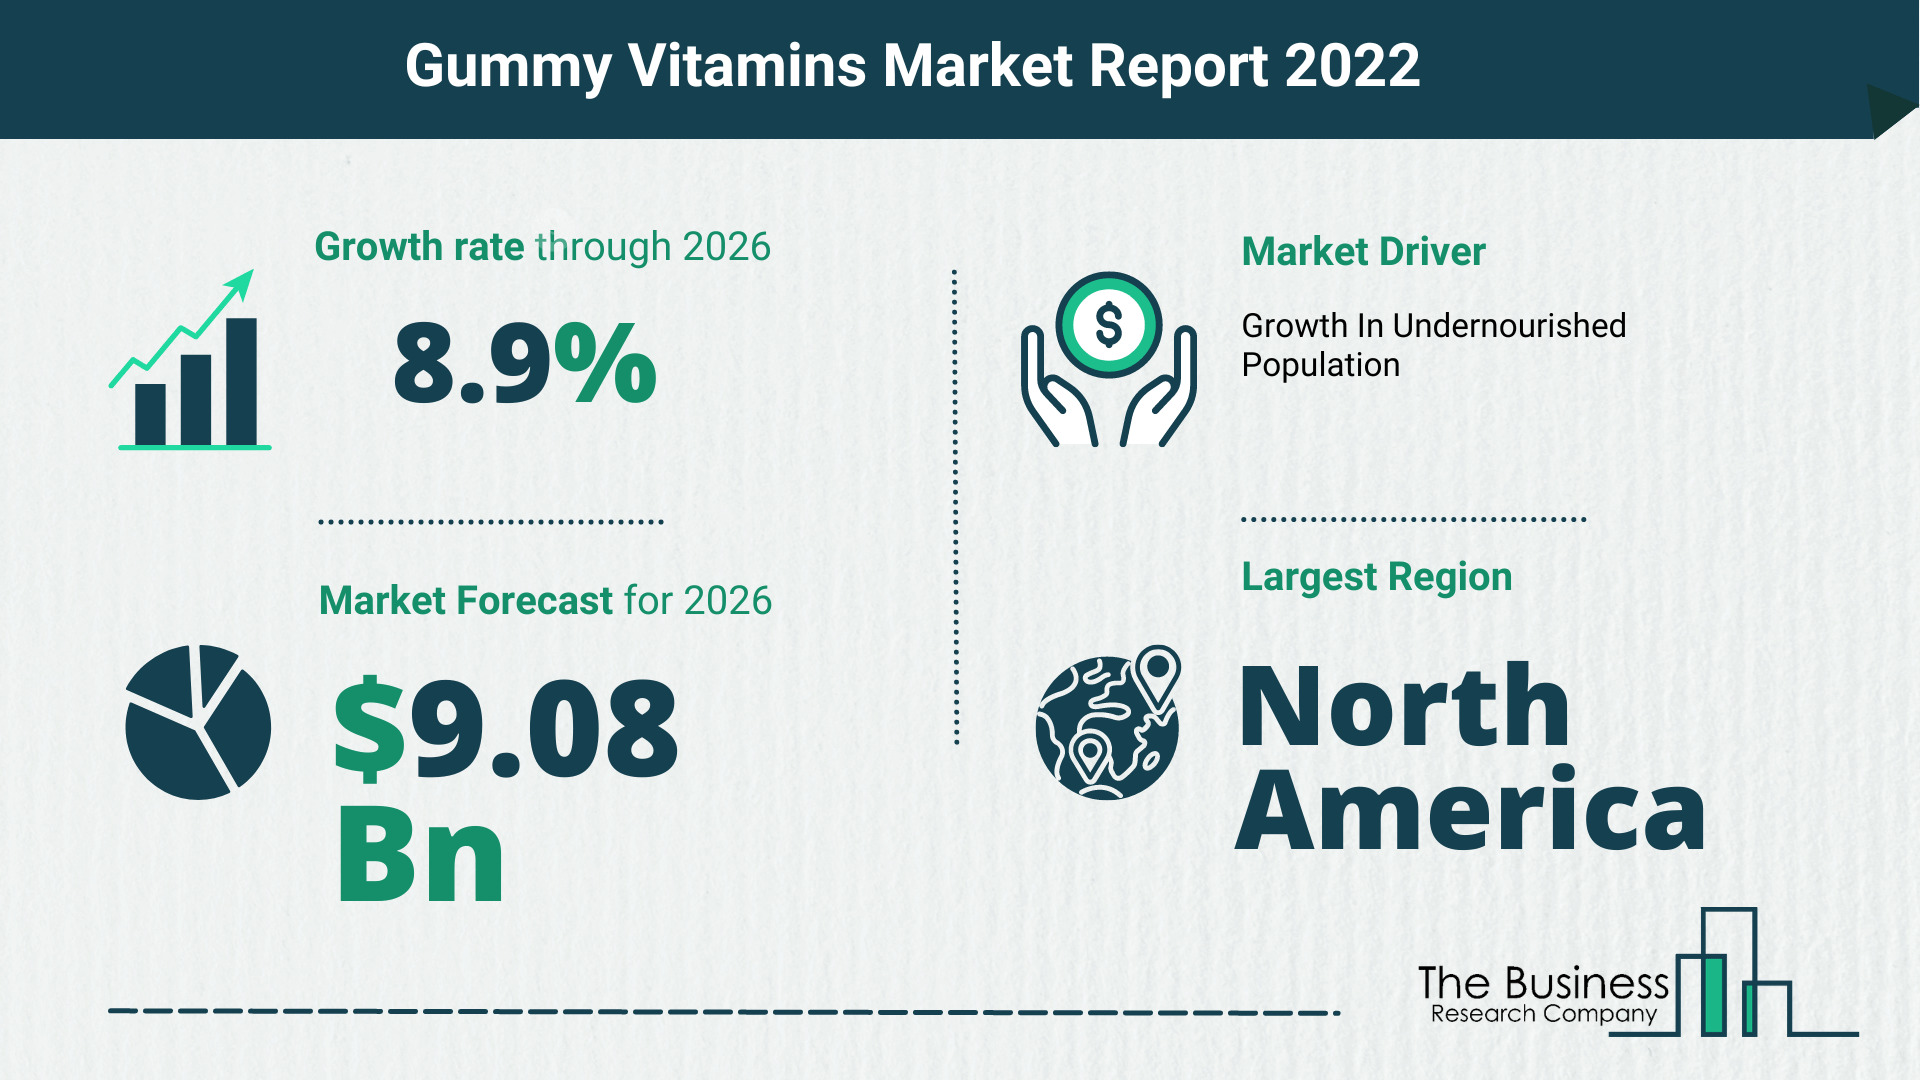 The Gummy Vitamins Market Share, Market Size, And Growth Rate 2022